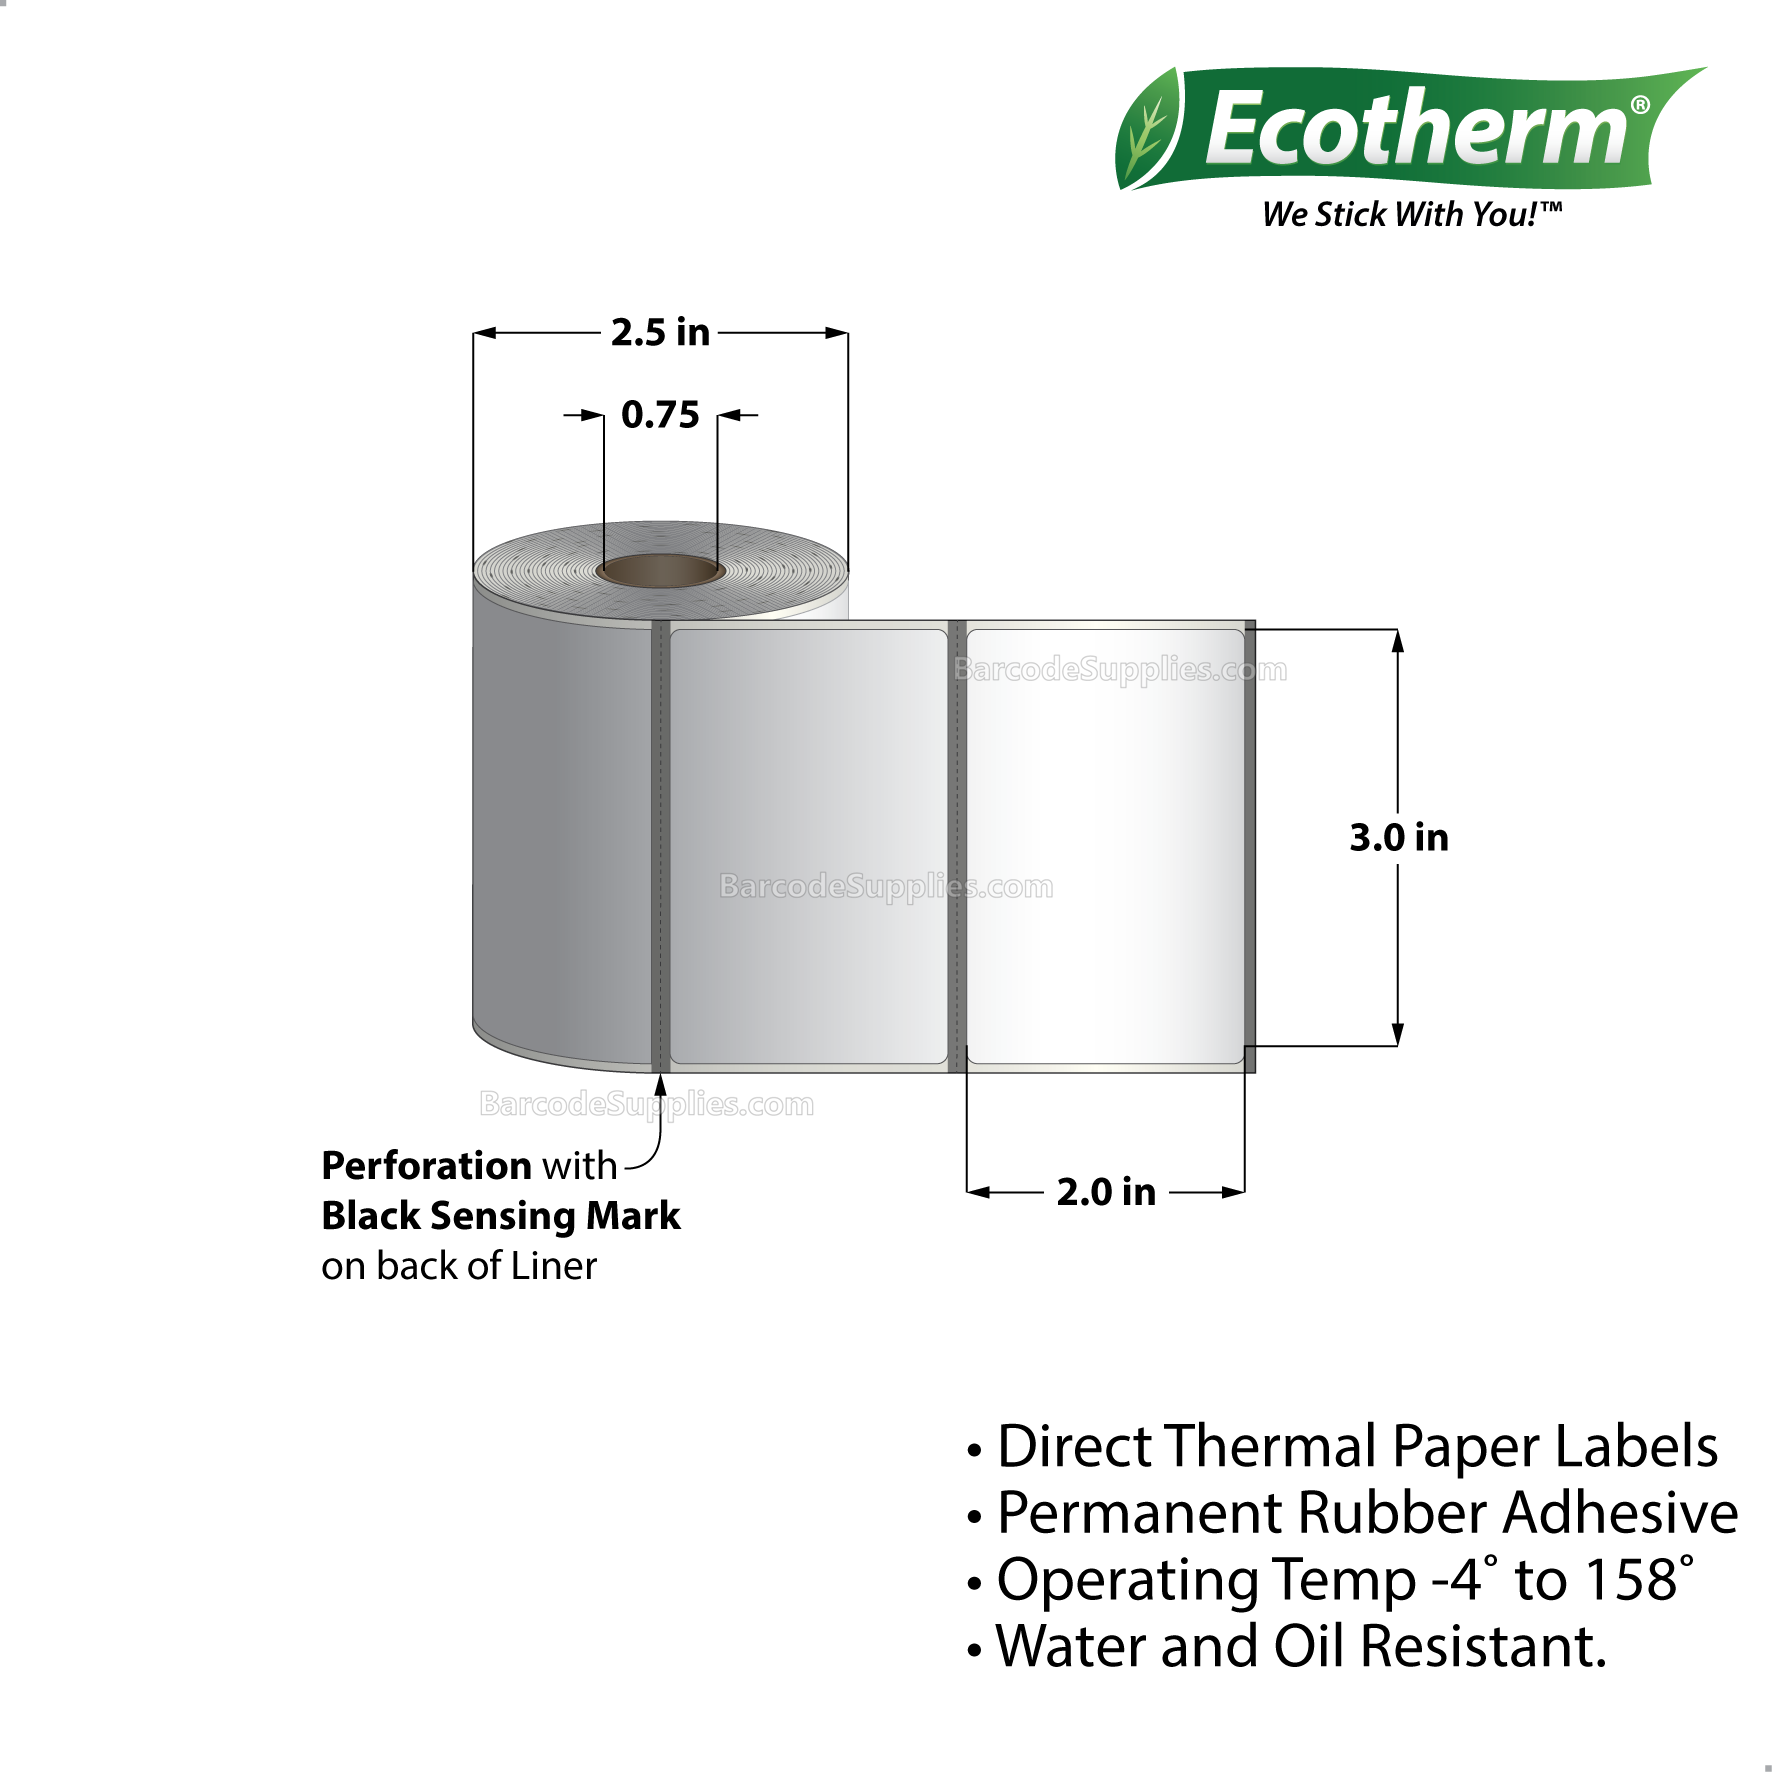 3 x 2 Direct Thermal White Labels With Rubber Adhesive - Perforated - 210 Labels Per Roll - Carton Of 25 Rolls - 5250 Labels Total - MPN: ECOTHERM13110-25